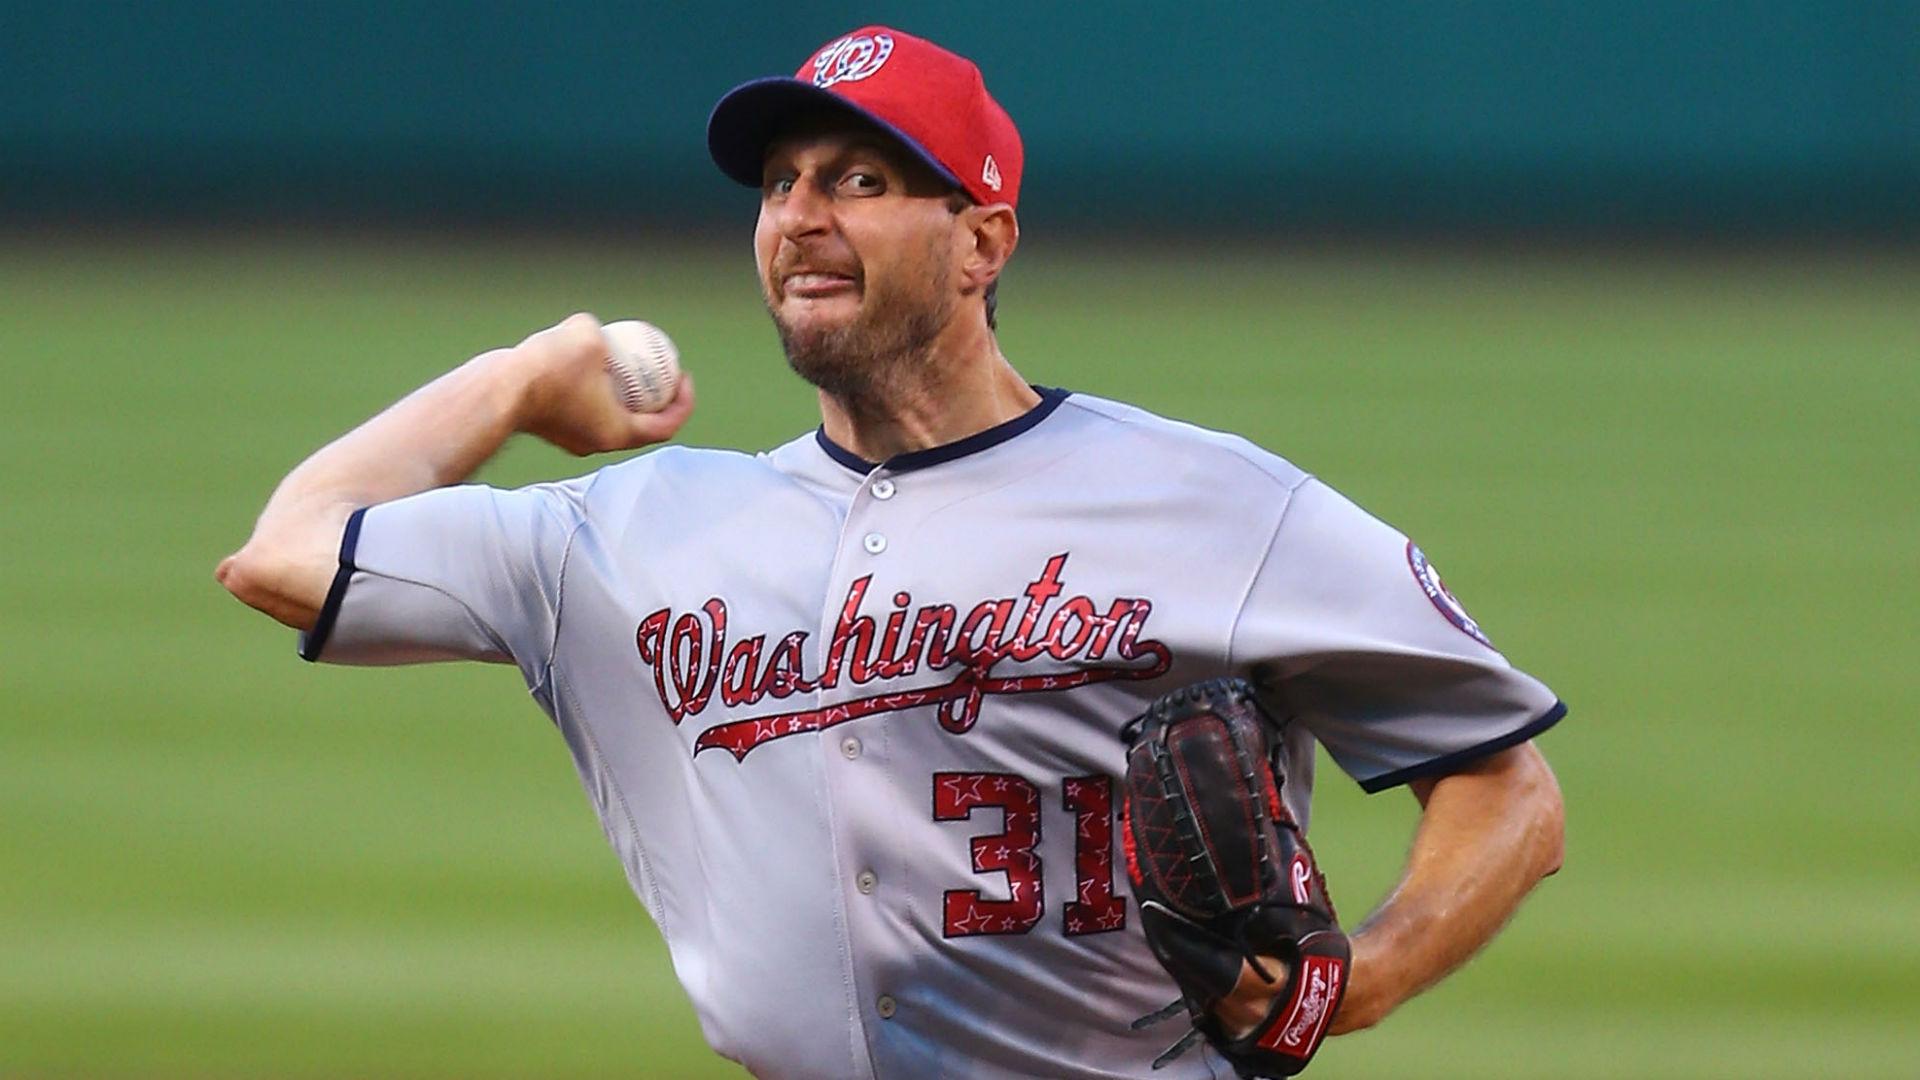 Max Scherzer hits home run, leaves game with apparent injury. MLB